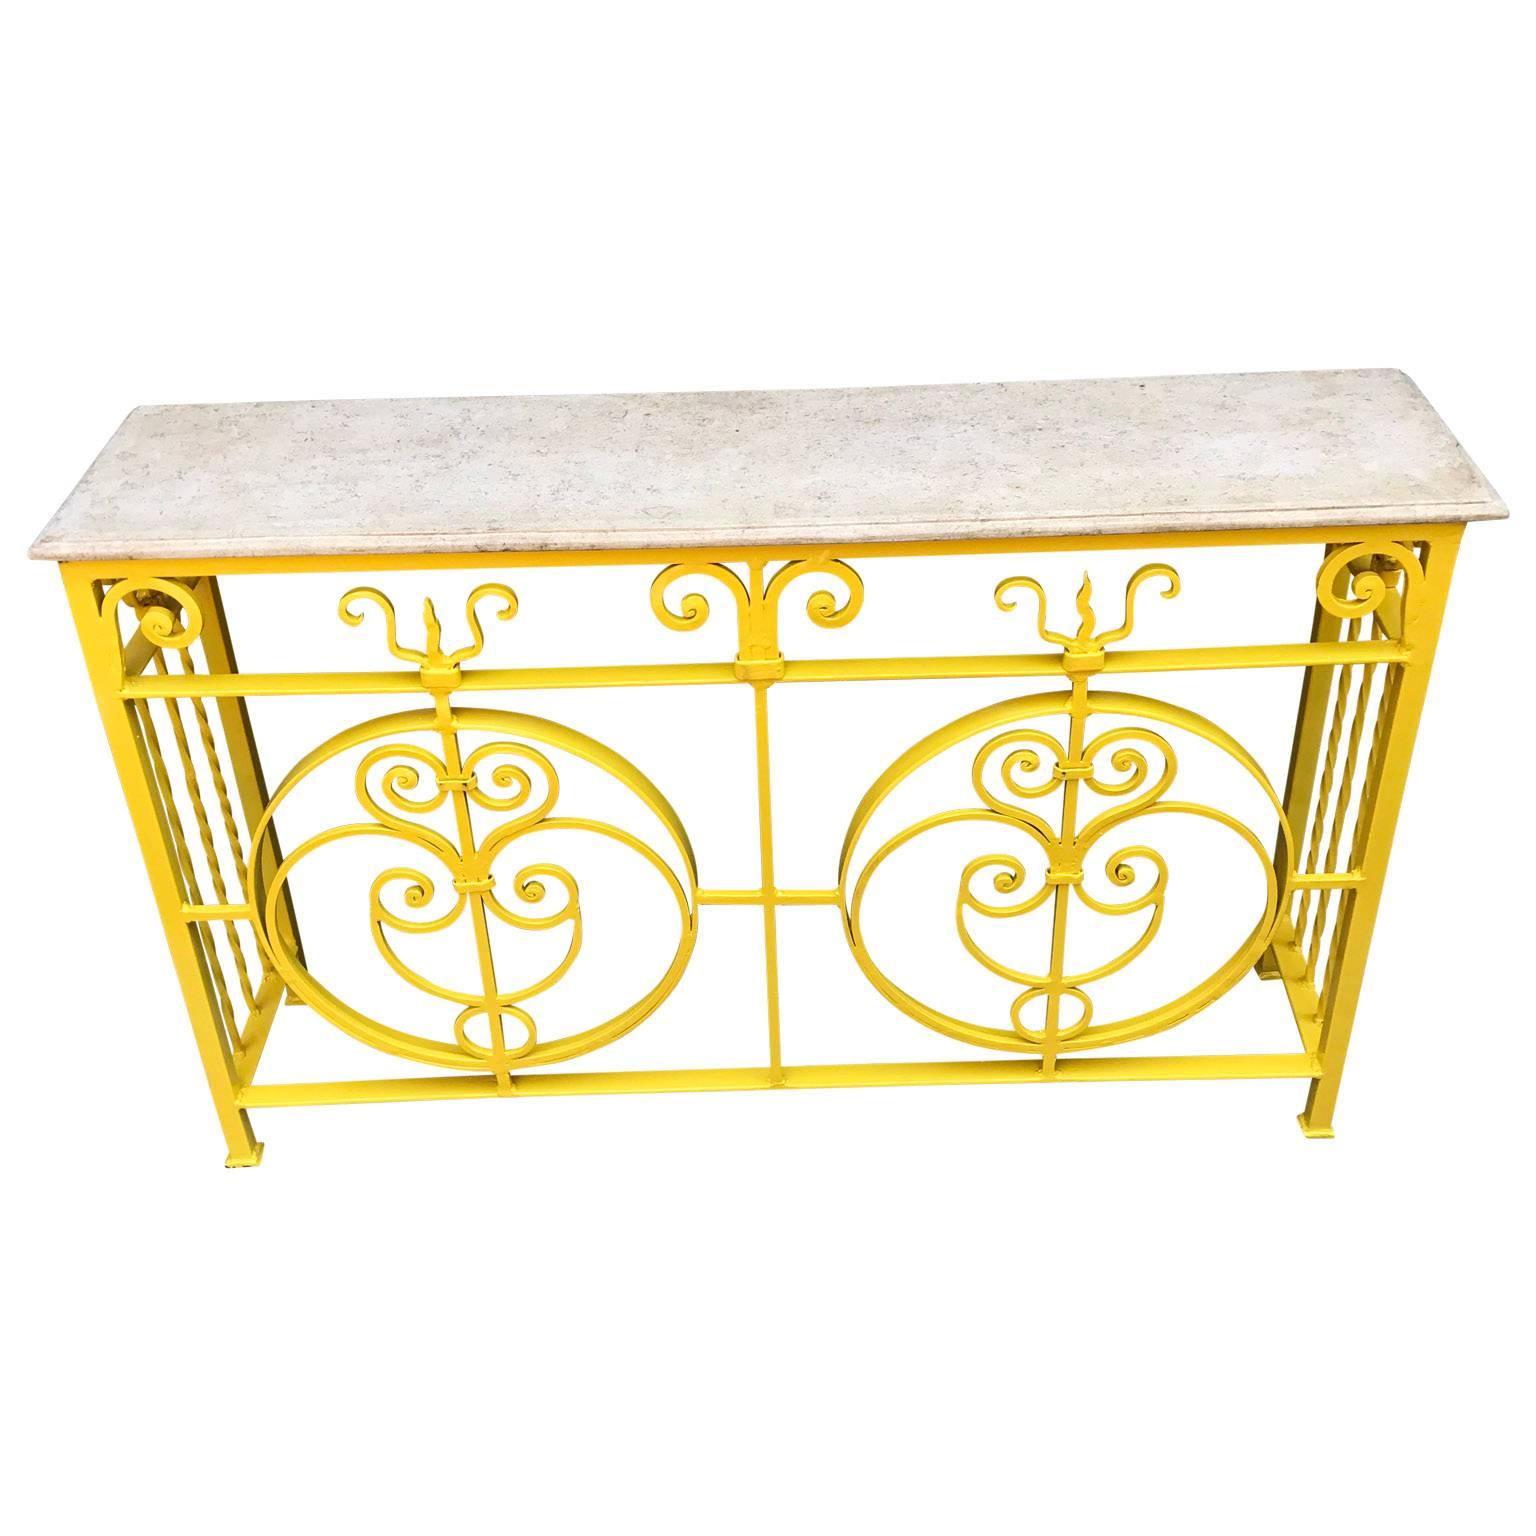 Set of two sunshine yellow garden console with profiled marble top.